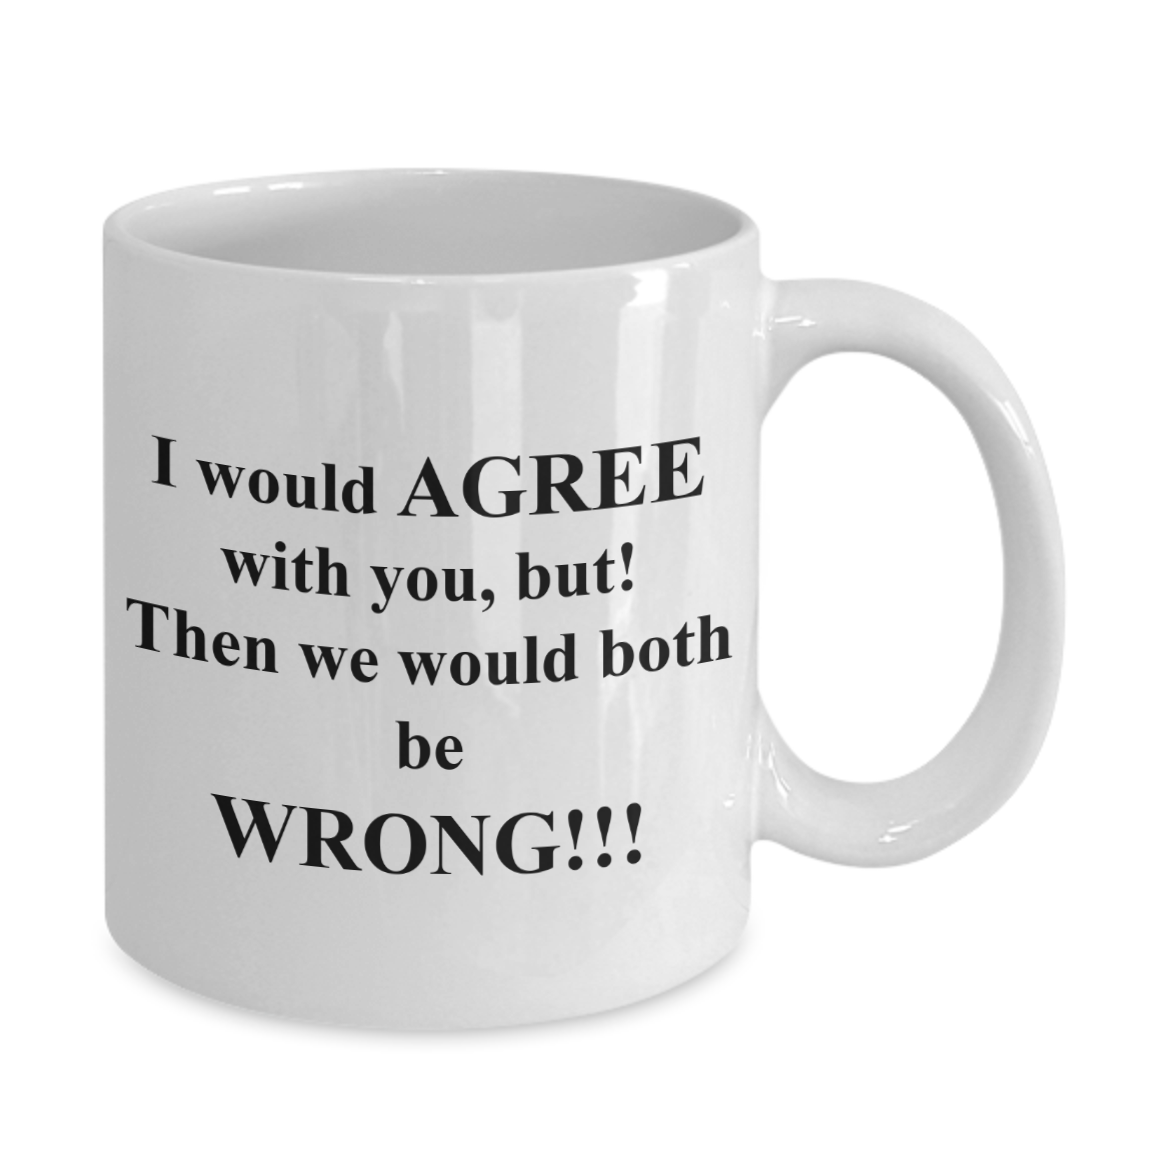 I Would Agree BUT!  - Funny Quotes Coffee Mug